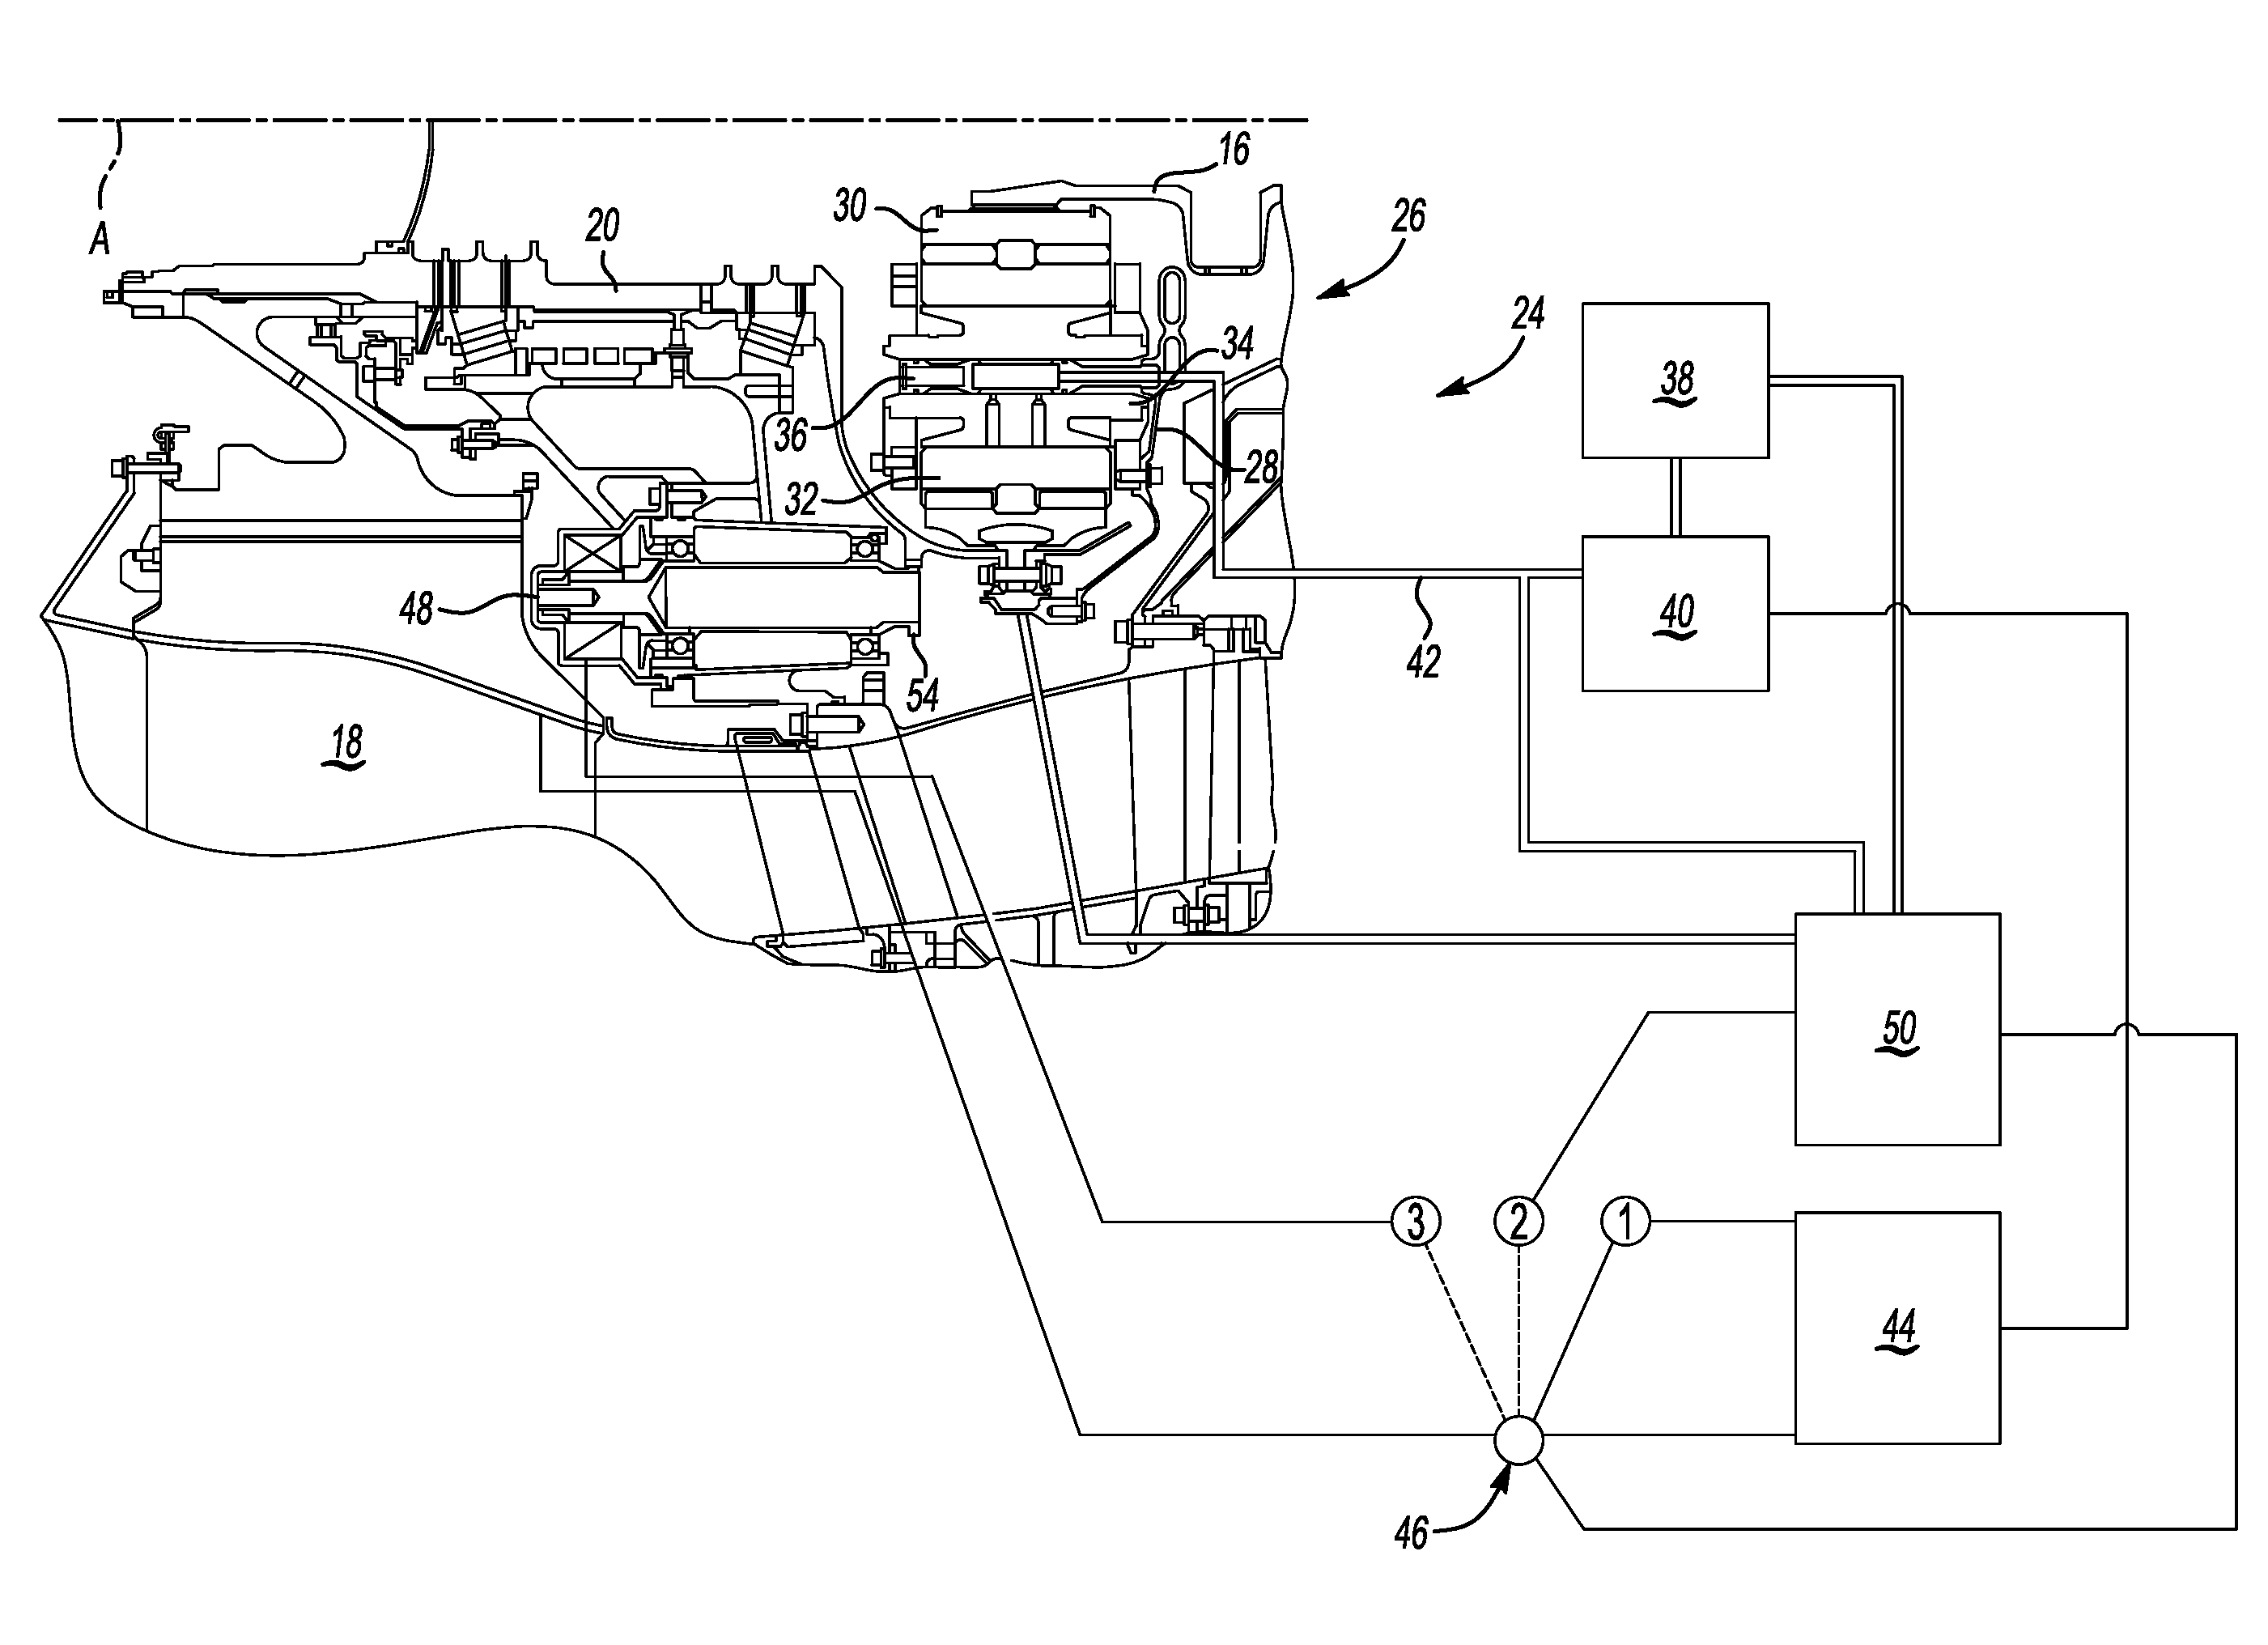 Rotor brake and windmilling lubrication system for geared turbofan engine